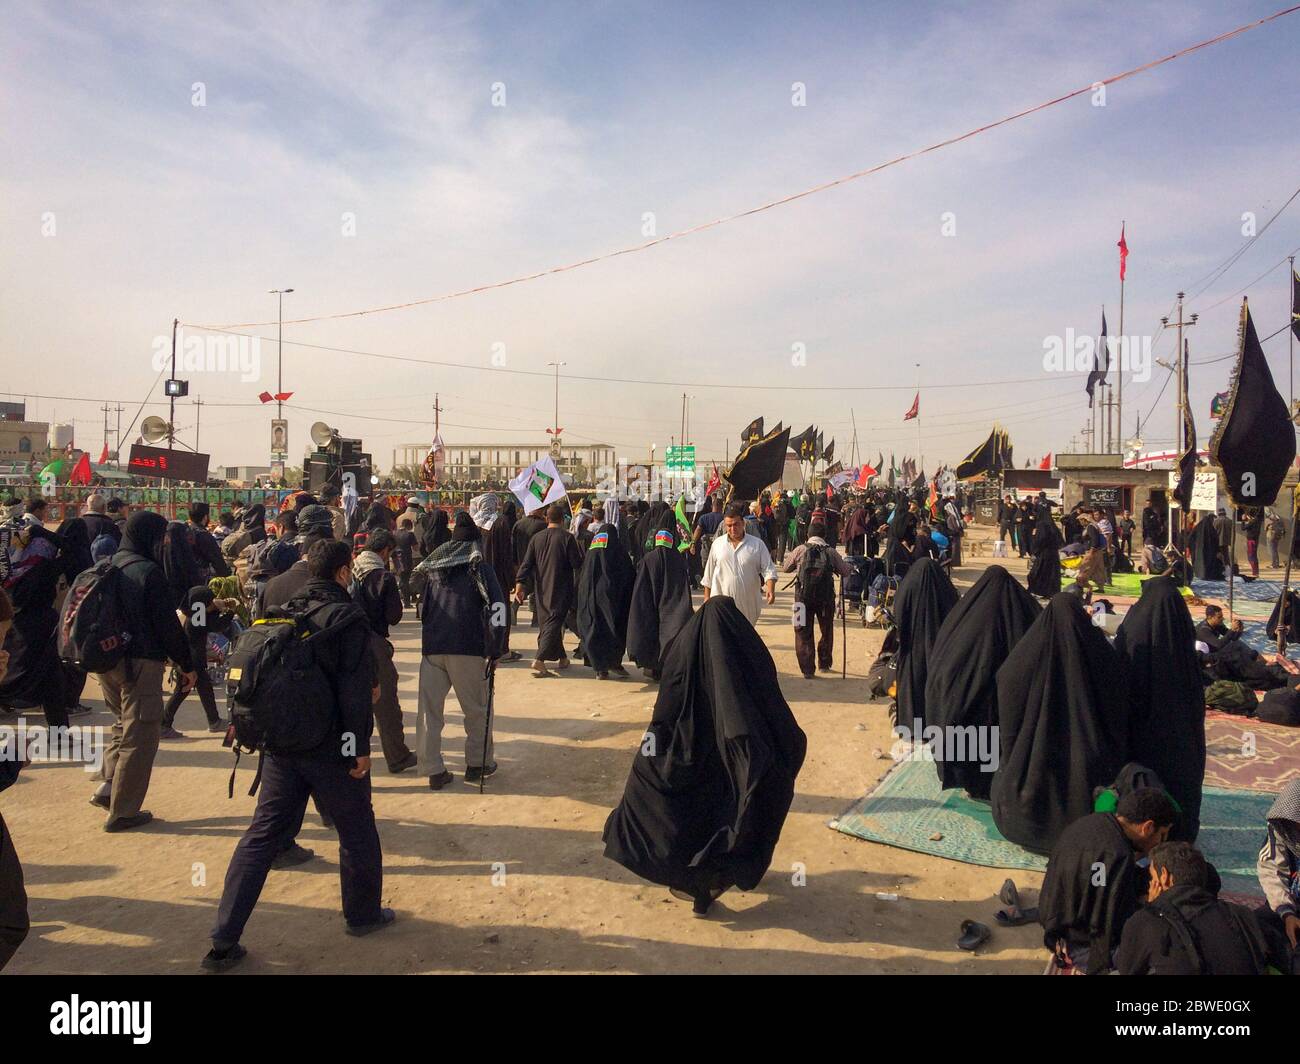 Karbala, Bagdad, Iraq, 06 09 2019:  Millions of Shia marching across the world to Karbala for arbaeen.  A great global gathering in Iraq. Stock Photo